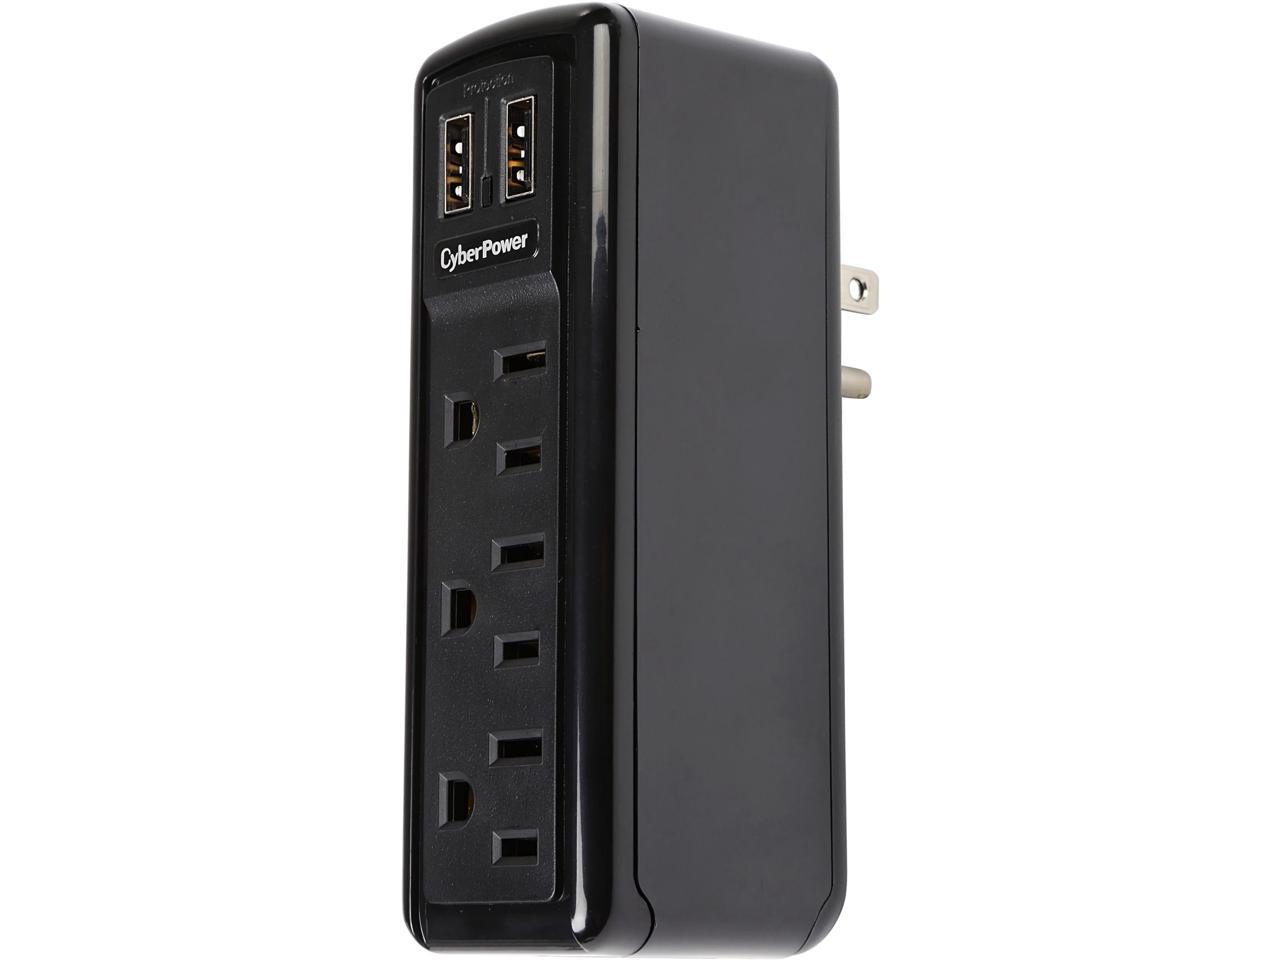 CyberPower 3 Outlets 2 USB Charging Ports Travel Surge Protector (TRVL918)